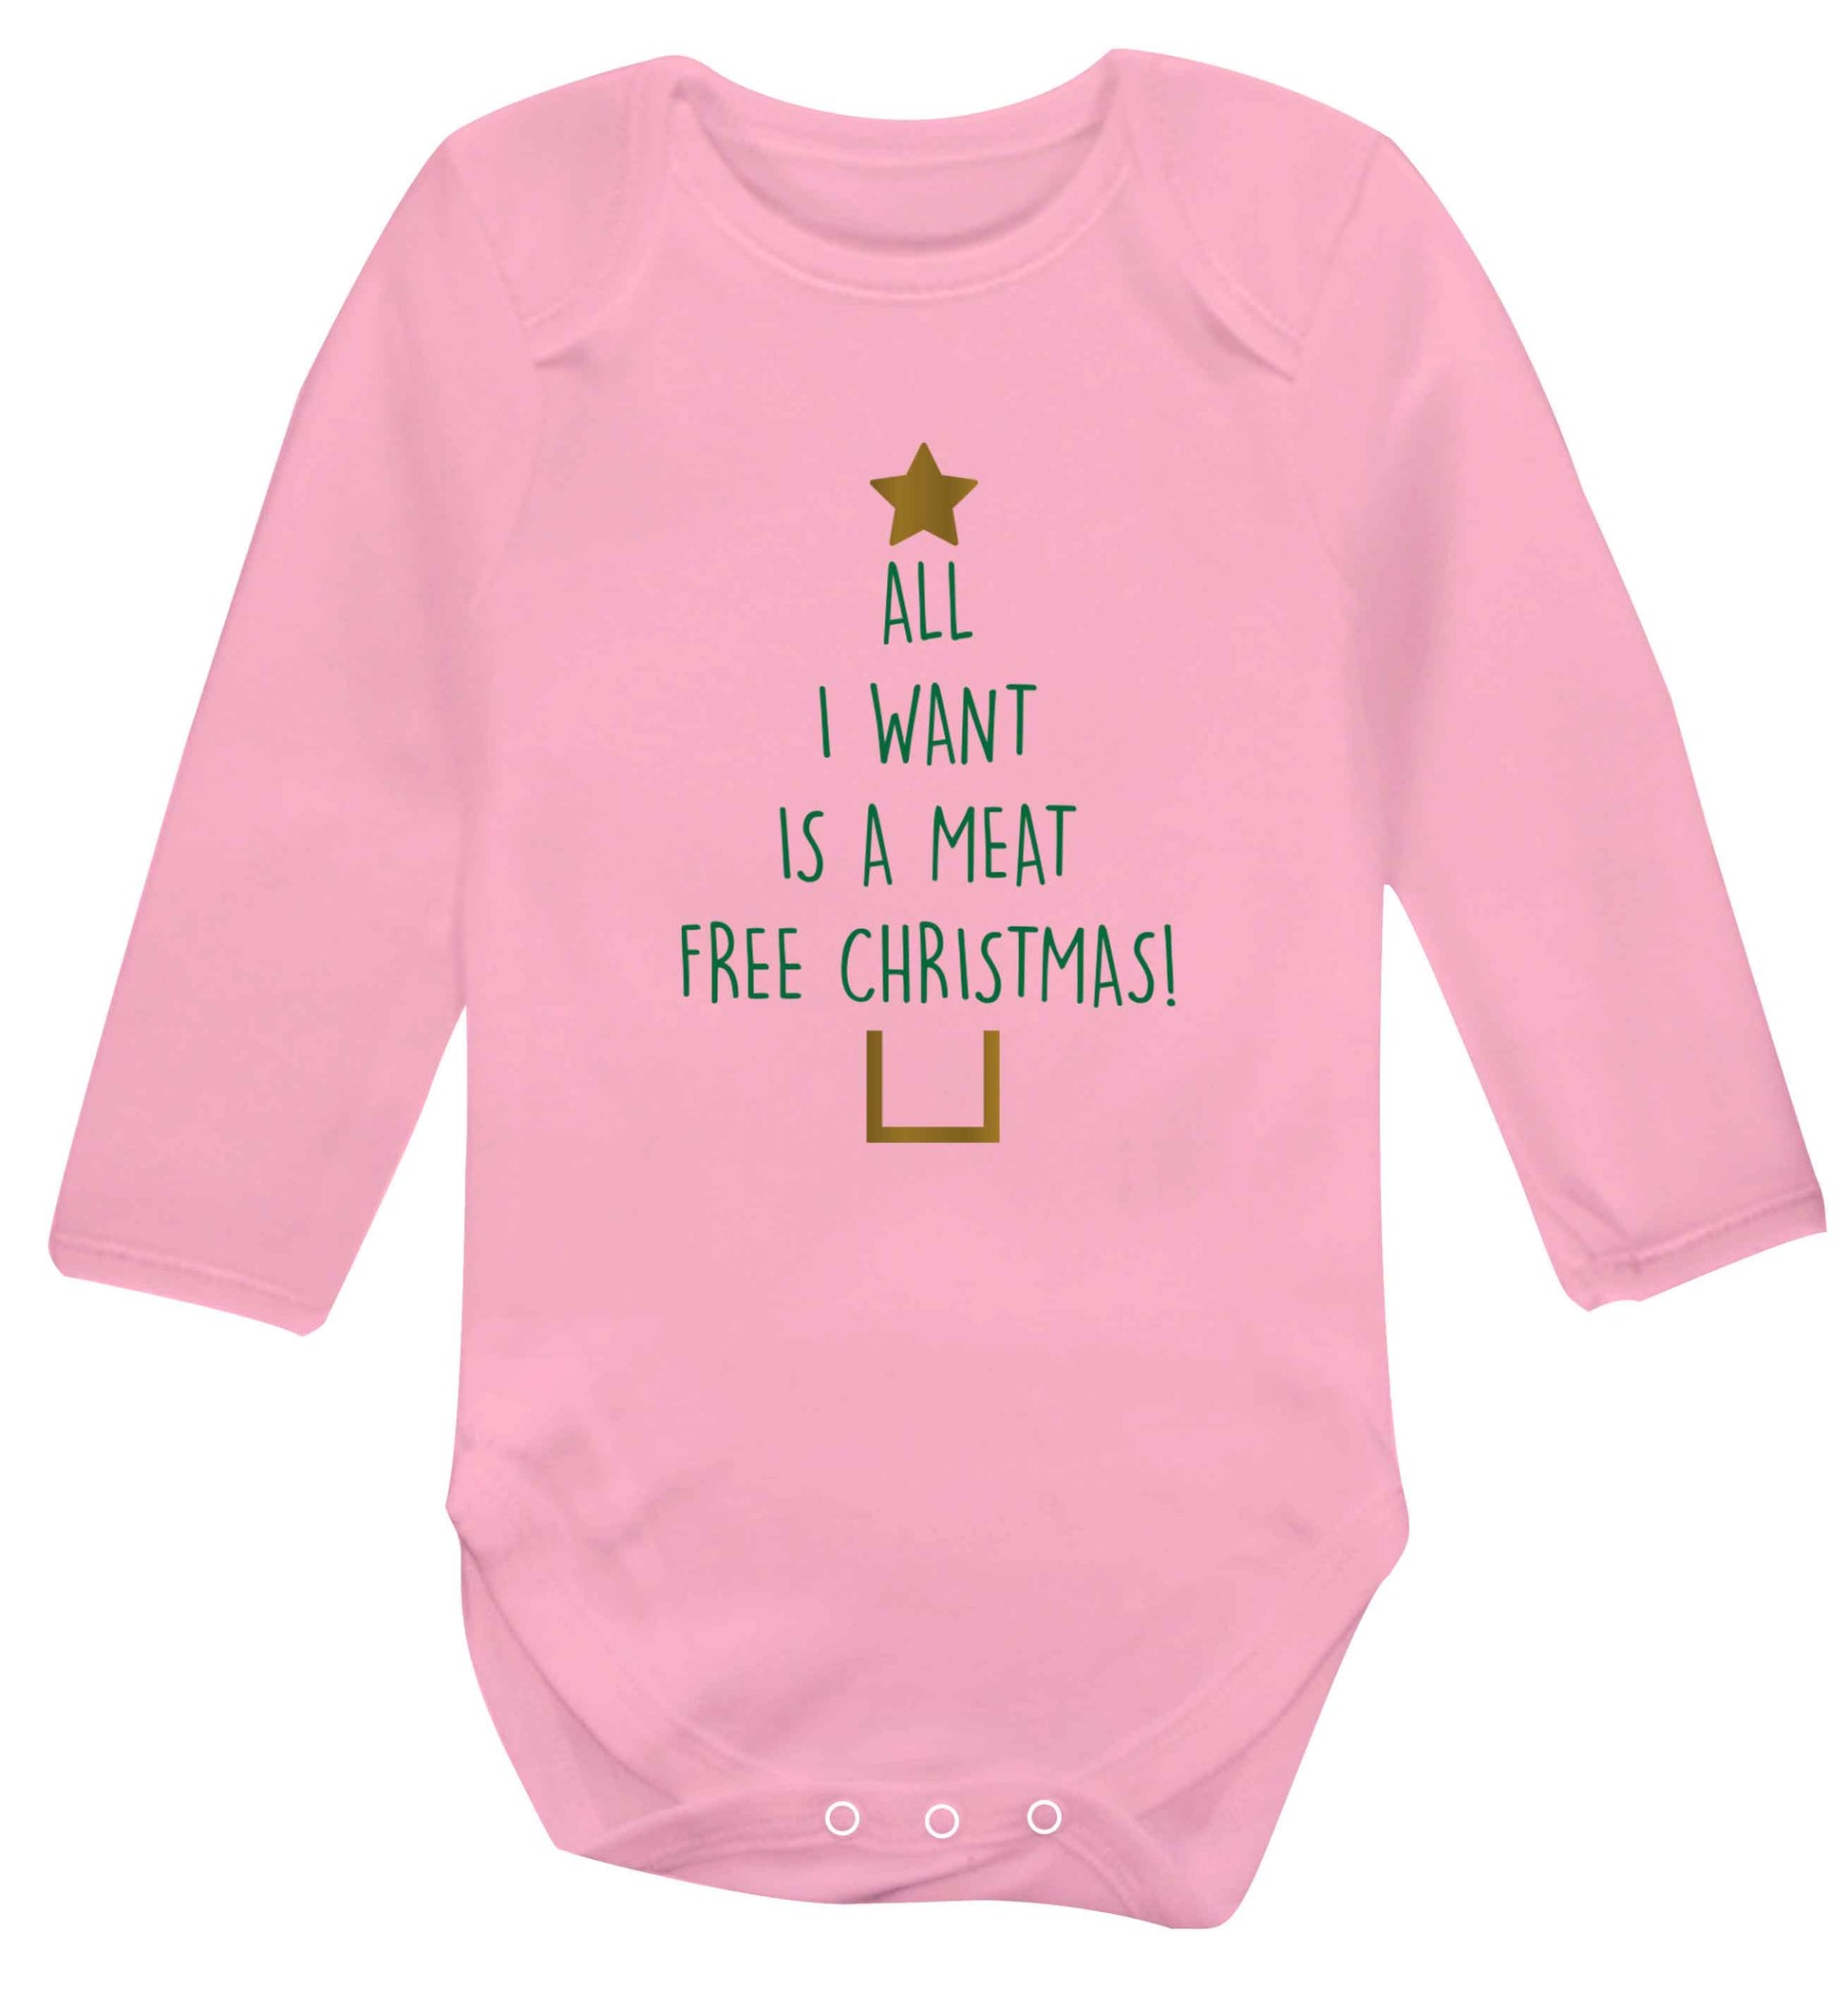 All I want is a meat free Christmas Baby Vest long sleeved pale pink 6-12 months